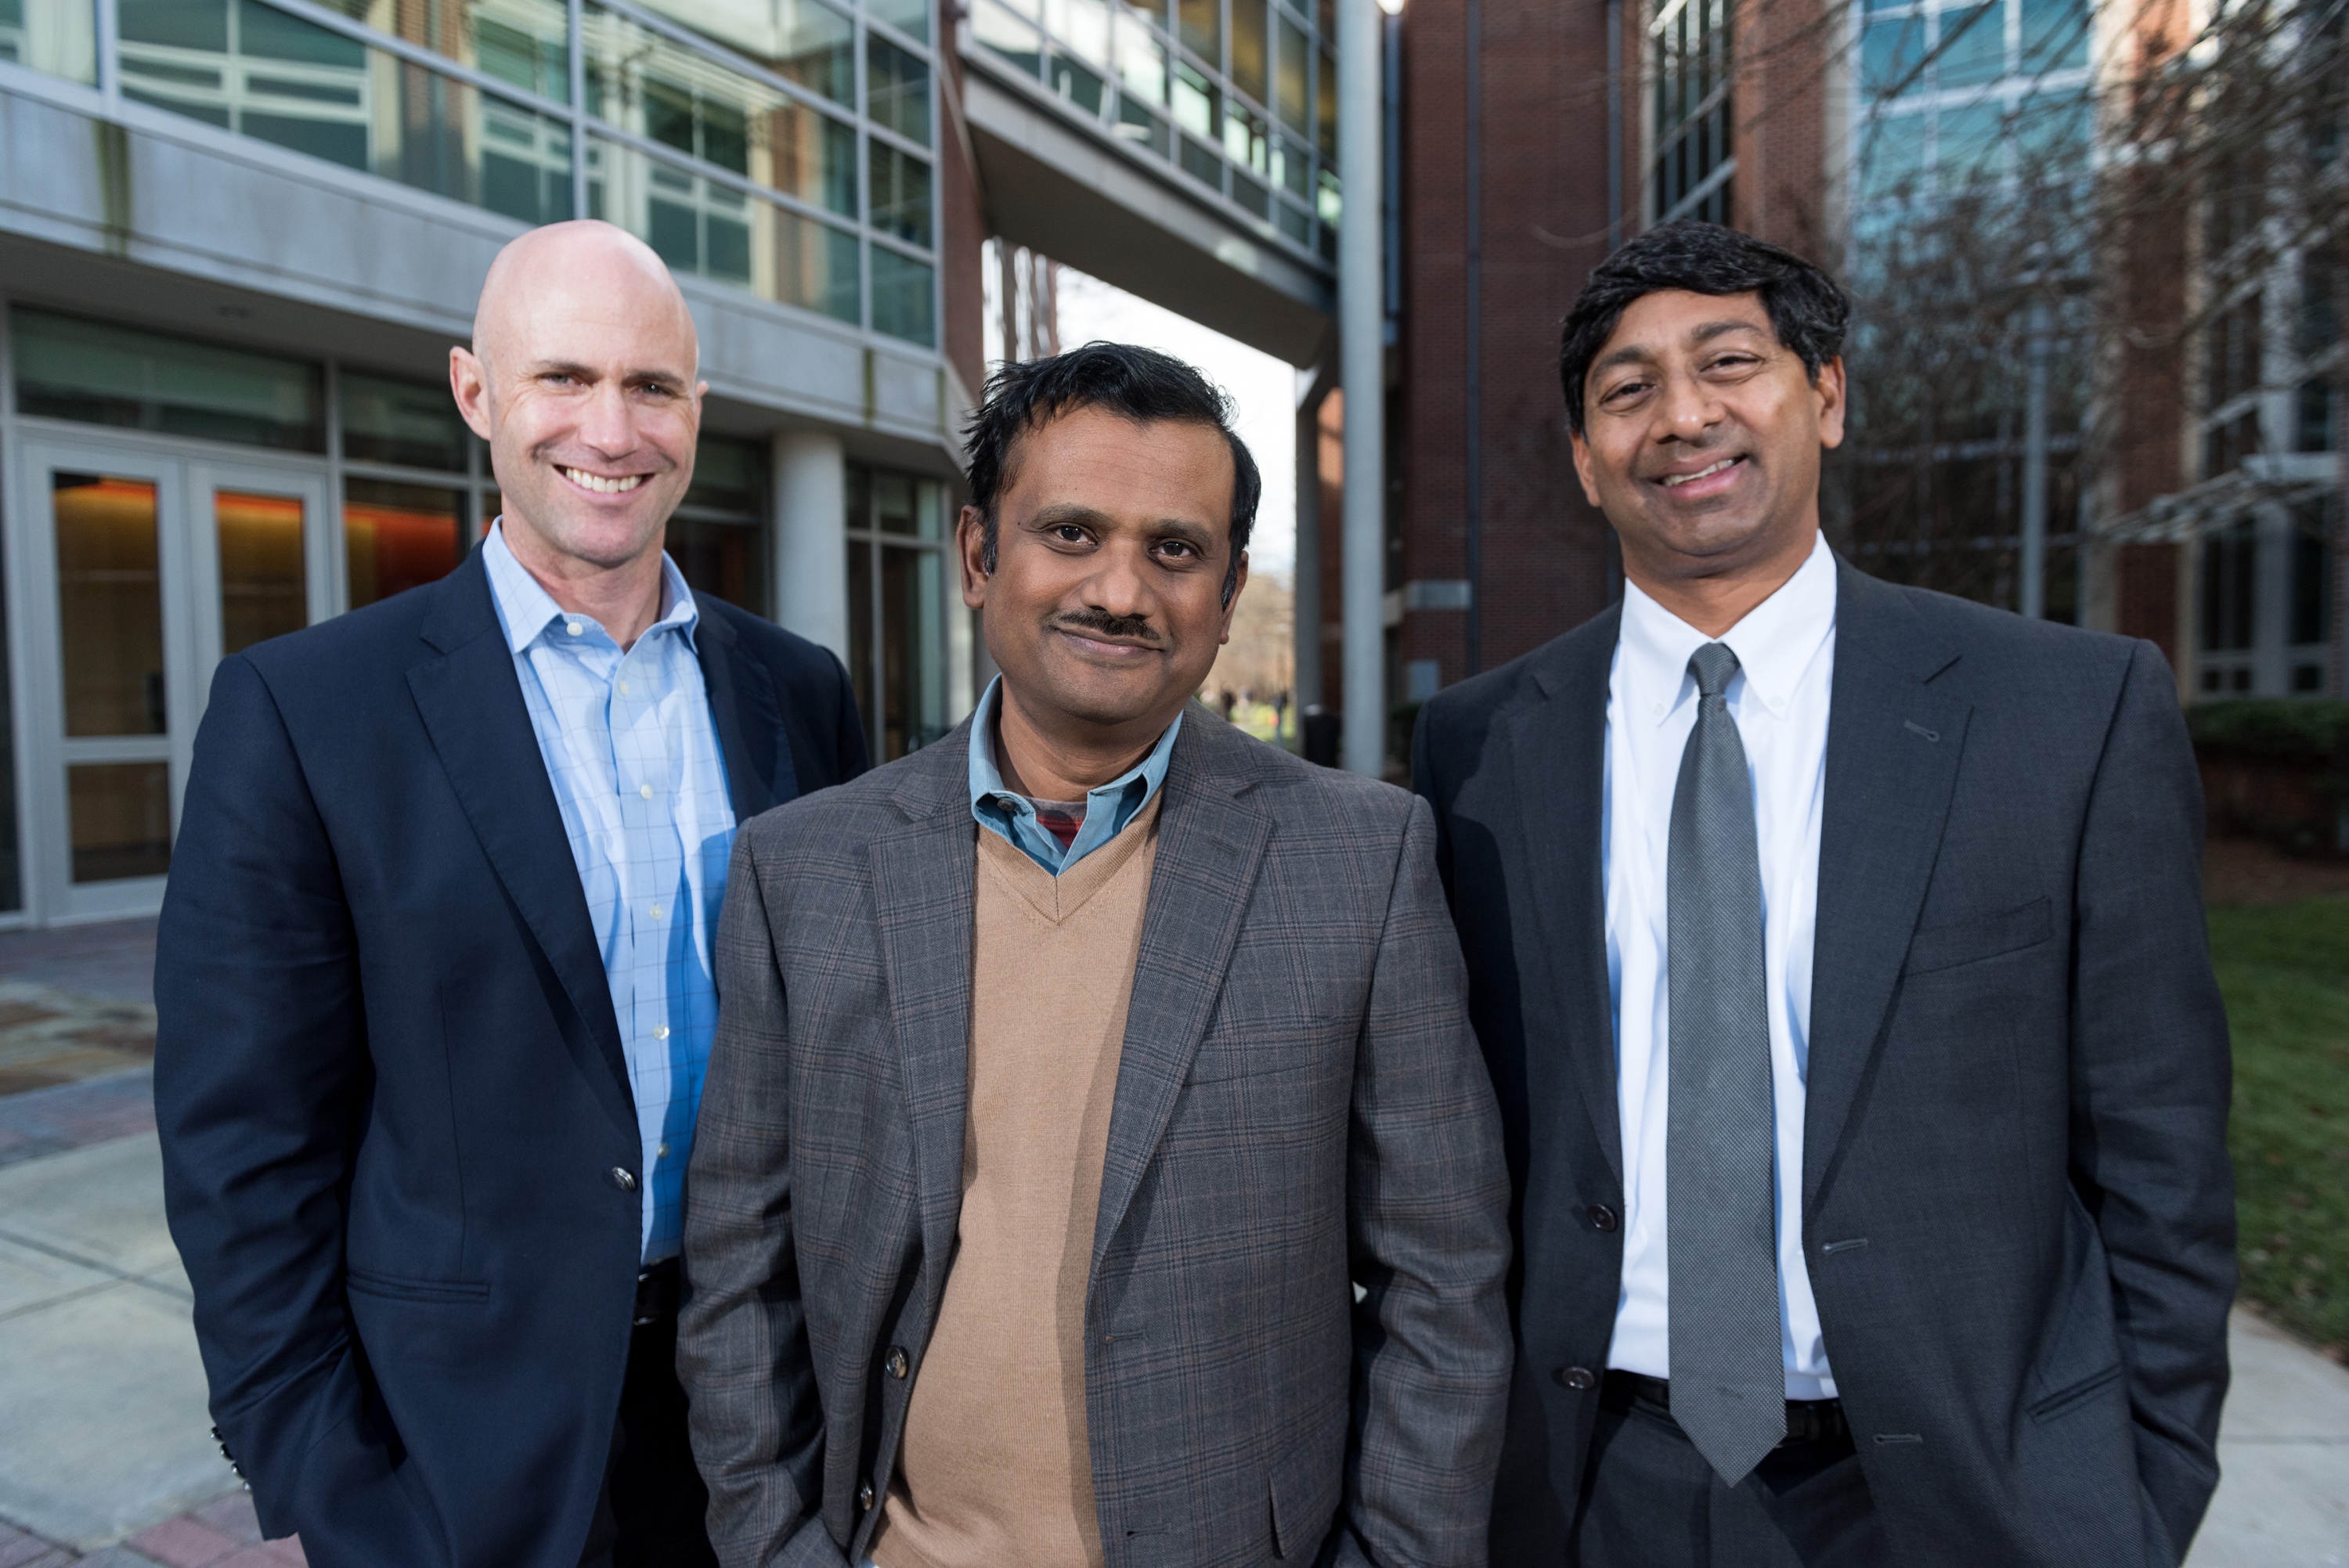 Georgia Tech has launched a new research center that will develop processes and techniques for ensuring the consistent, low-cost, large-scale manufacture of high-quality living cells used in cell-based therapies. Shown (l-r) are Robert Guldberg, executive director of Georgia Tech’s Petit Institute for Bioengineering and Bioscience; Krishnendu Roy, Robert A. Milton Chair and professor in the Wallace H. Coulter Department of Biomedical Engineering at Georgia Tech and Emory University, and Ravi Bellamkonda, 